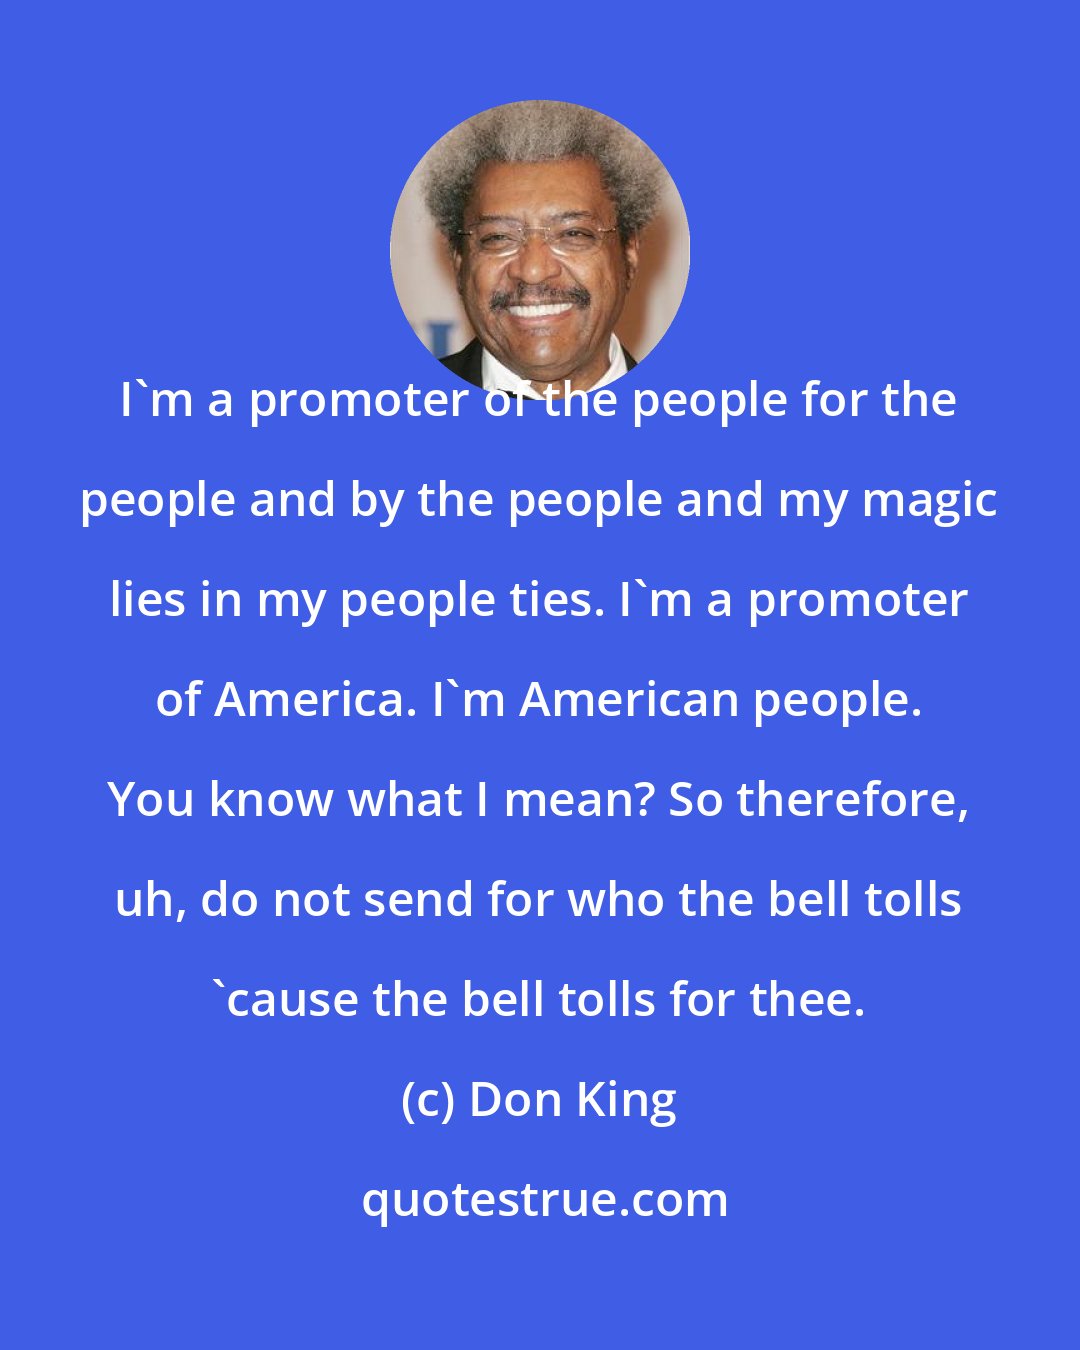 Don King: I'm a promoter of the people for the people and by the people and my magic lies in my people ties. I'm a promoter of America. I'm American people. You know what I mean? So therefore, uh, do not send for who the bell tolls 'cause the bell tolls for thee.